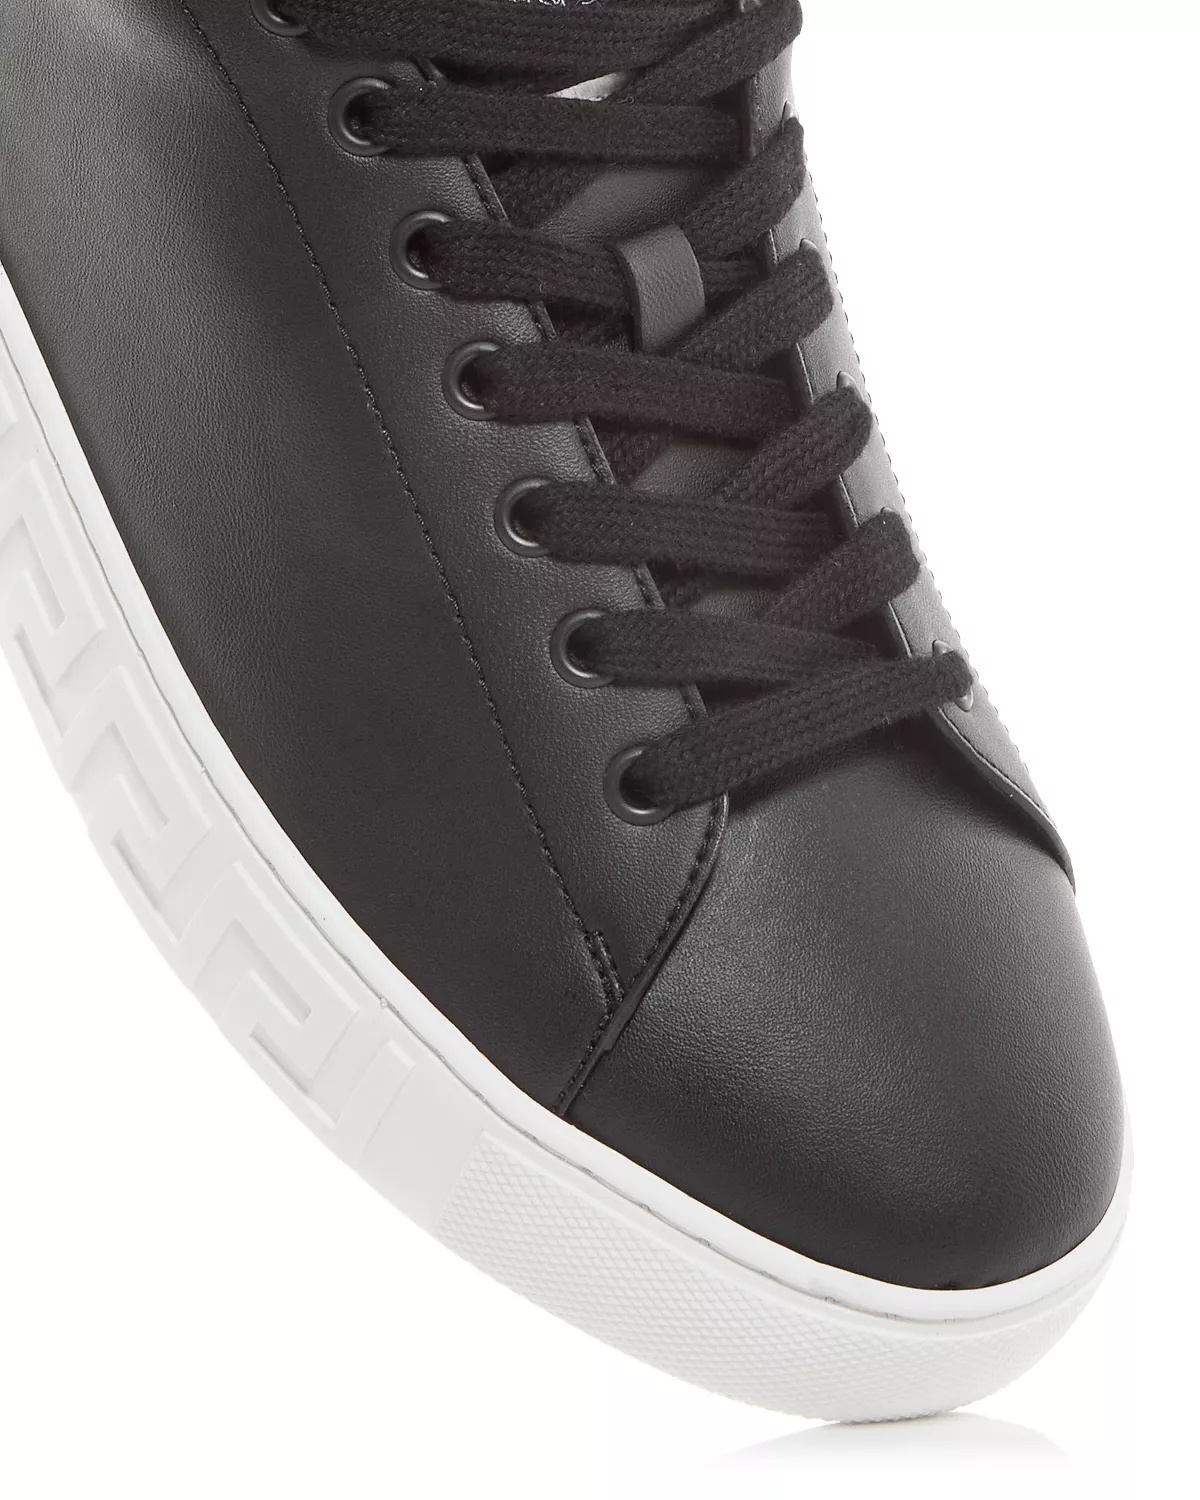 Men's Lace Up Sneakers - 3